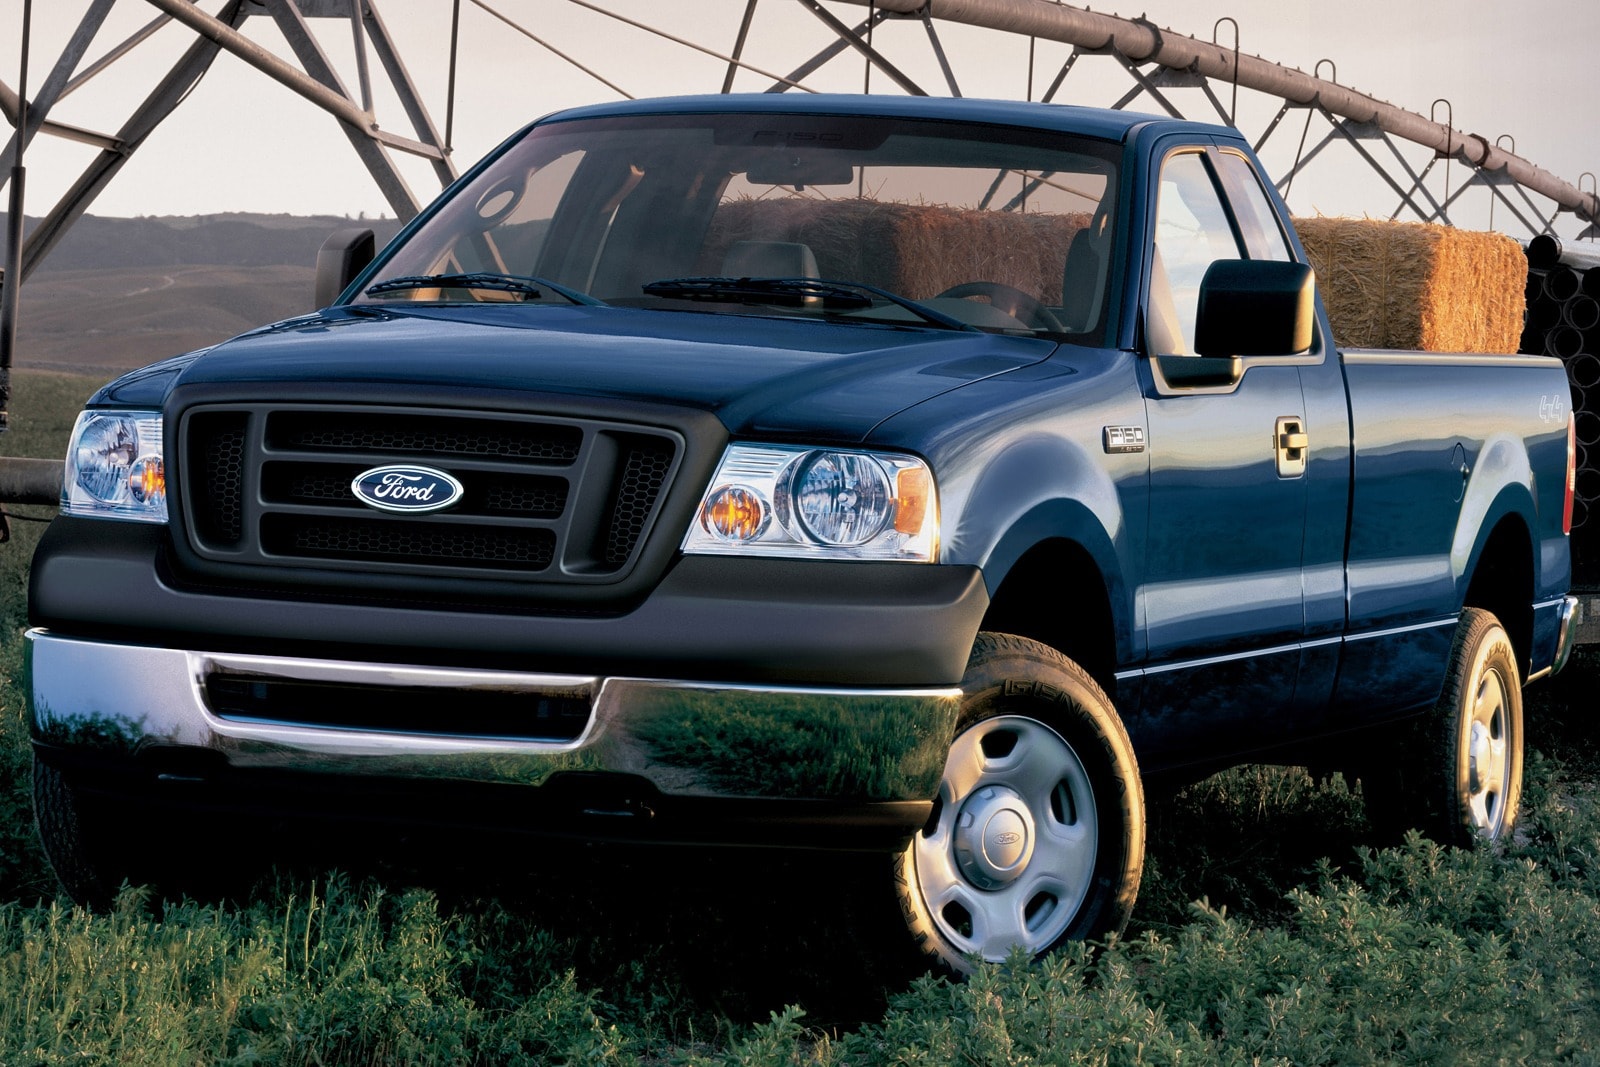 Used 2008 Ford F-150 Regular Cab Review | Edmunds